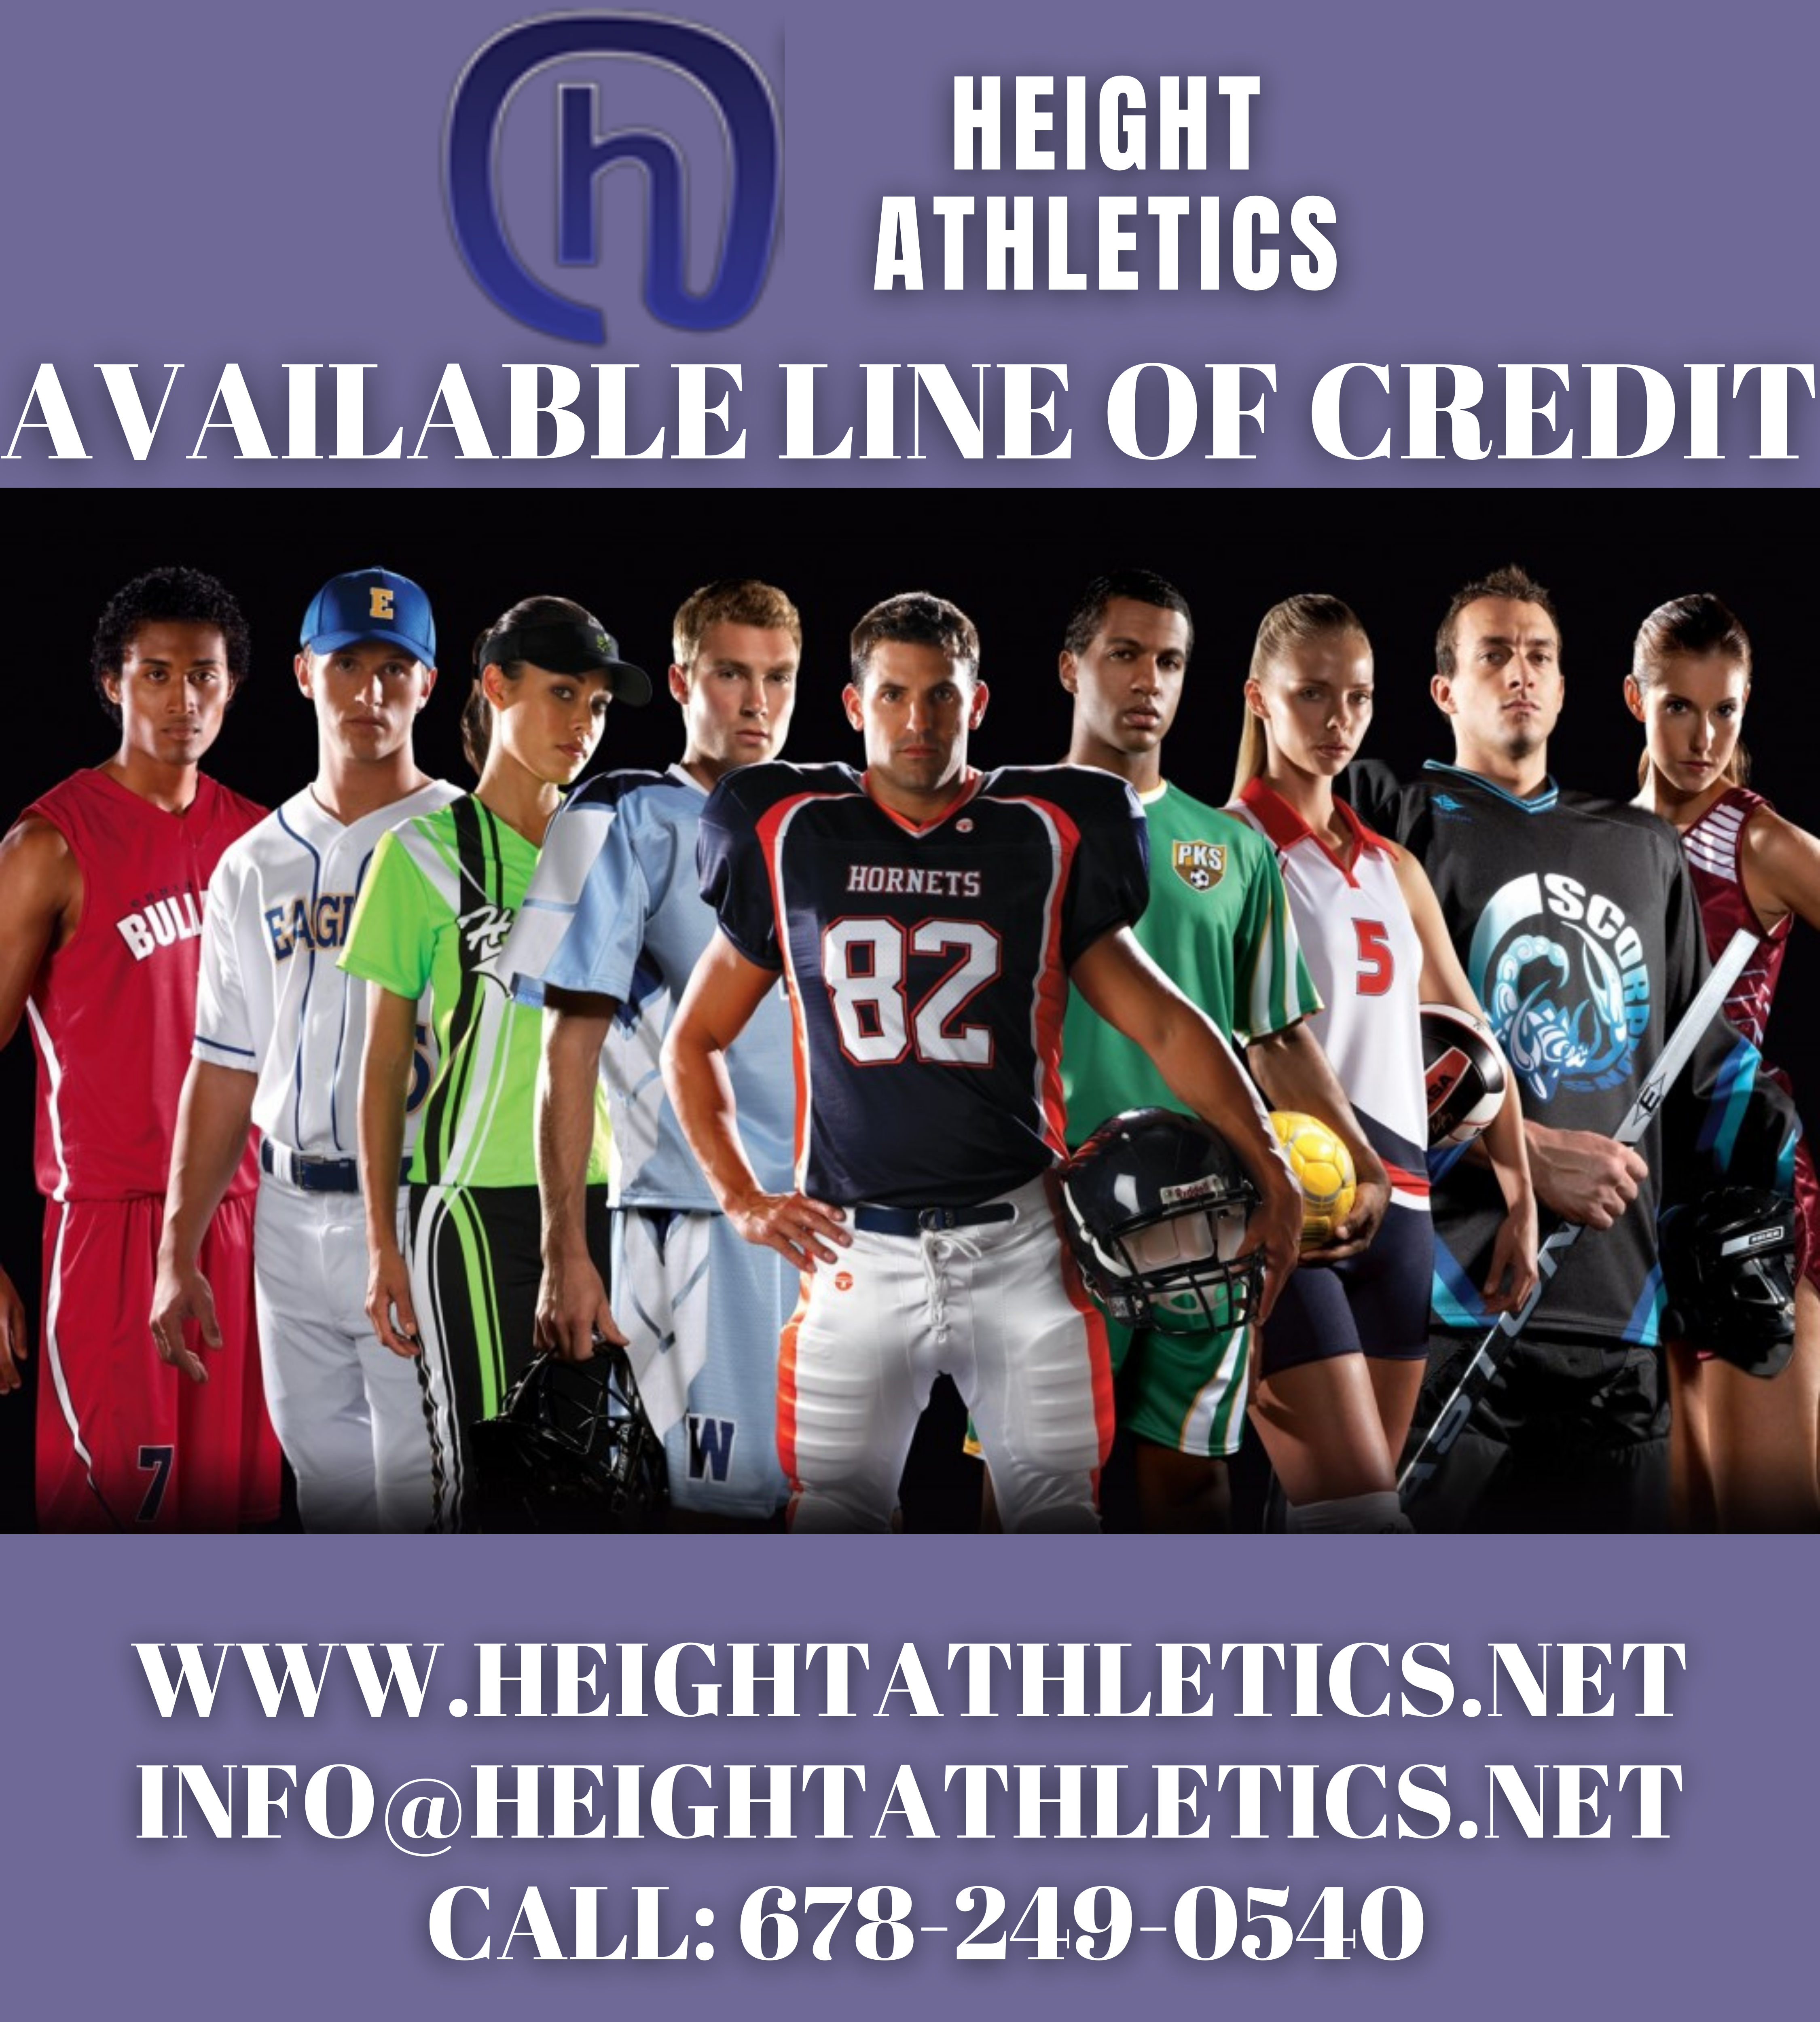 Height-athletics-uniforms-1.png